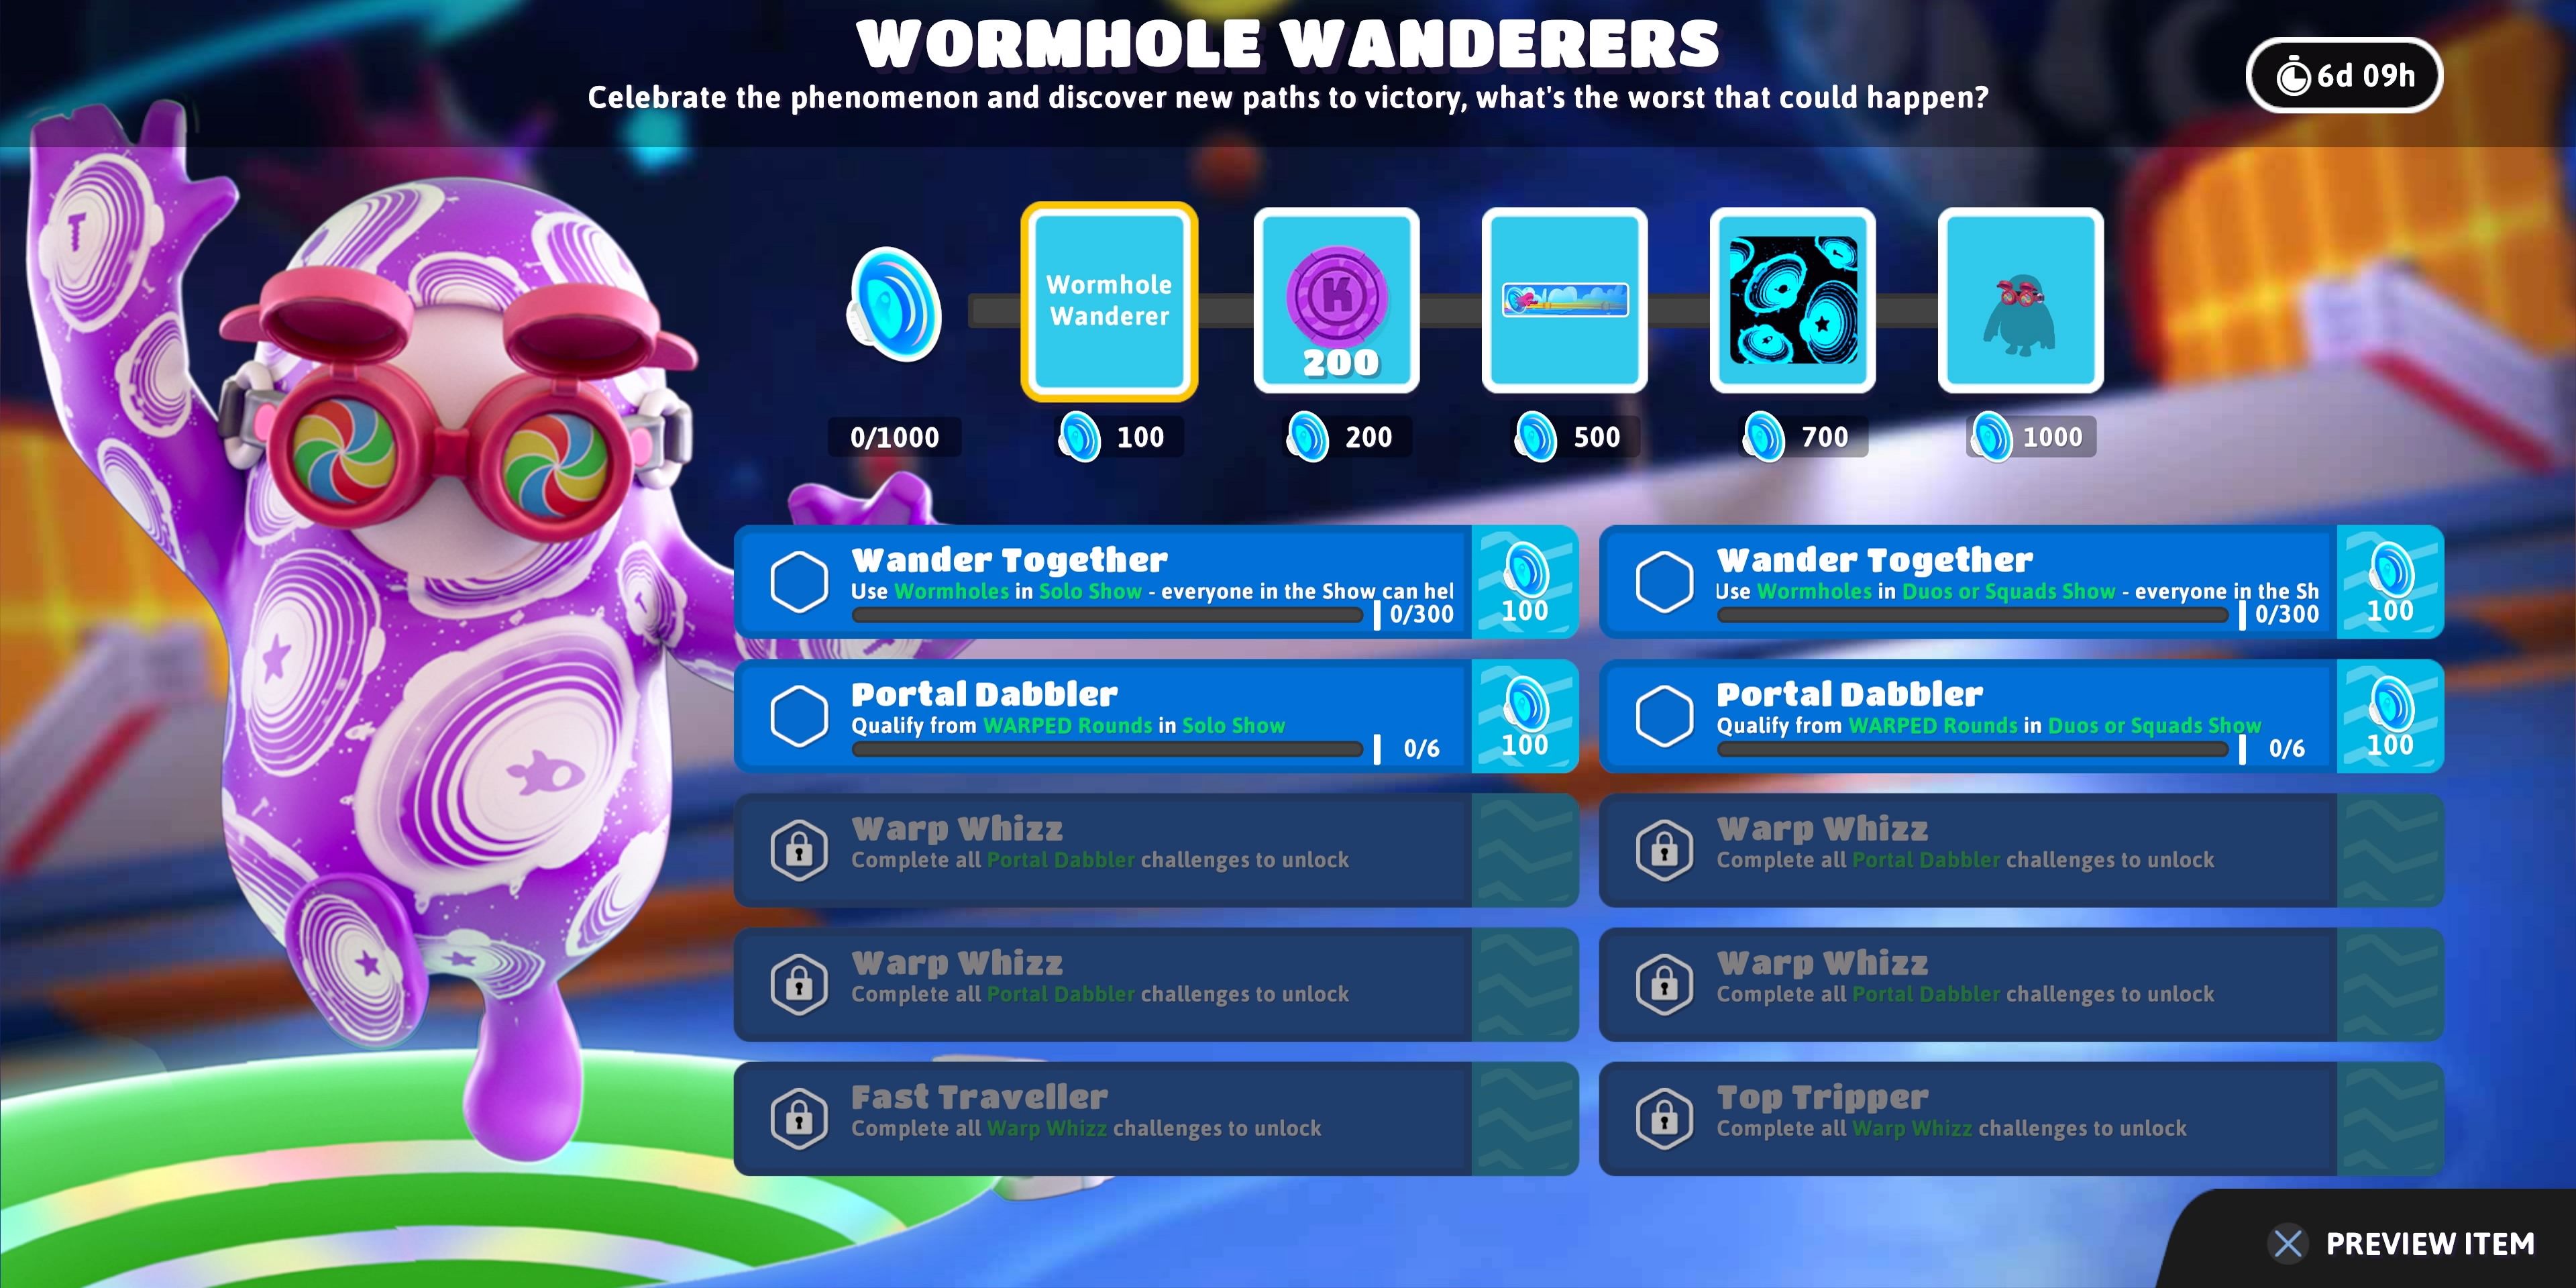 Wormhole Wanderers Event screen with the event challenges and rewards on it